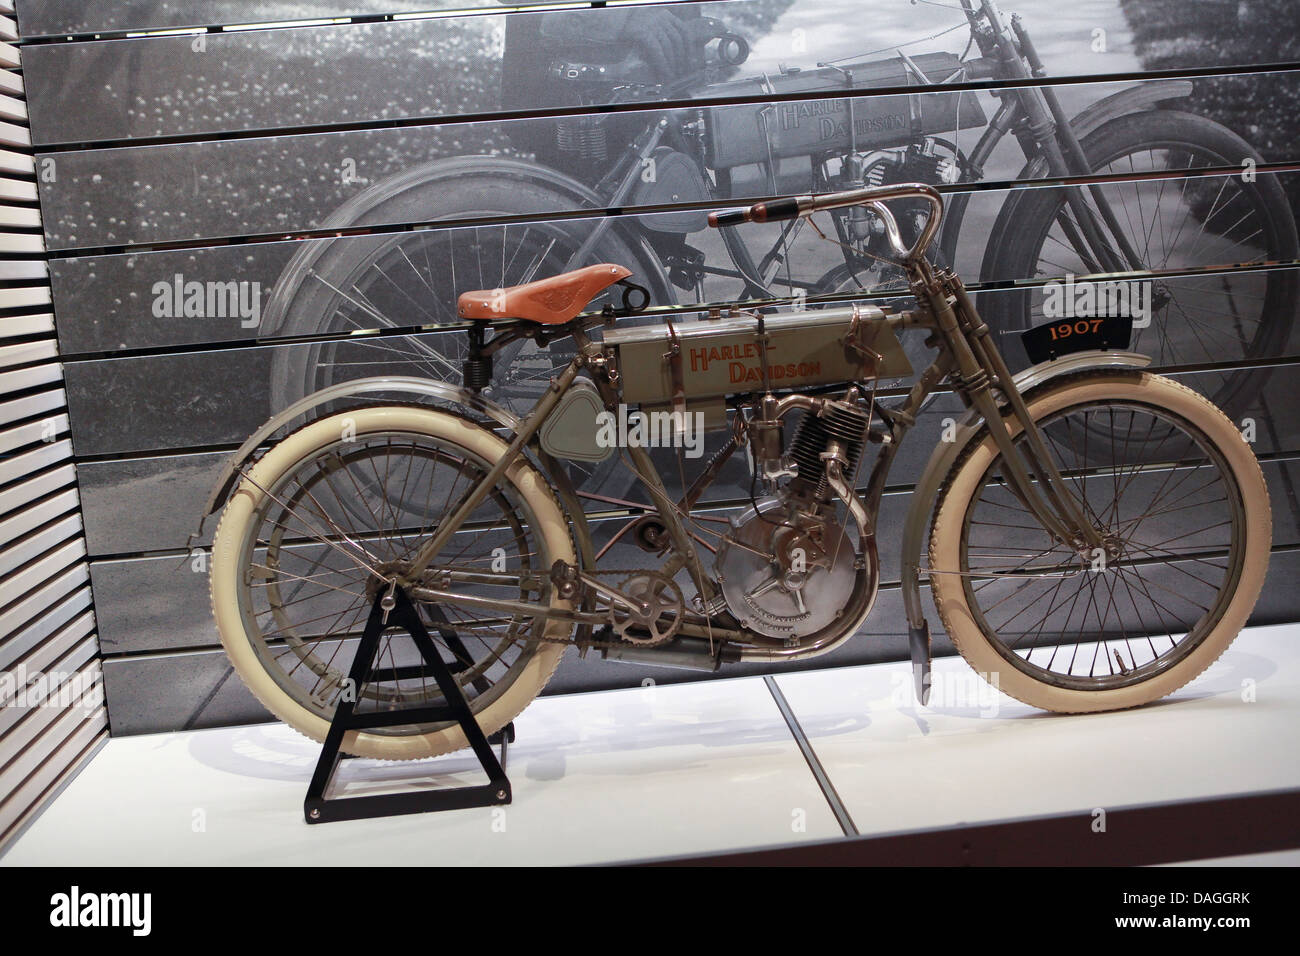 A 1907 Harley-Davidson motorcycle is seen on display at the Harley-Davidson museum in Milwaukee Stock Photo